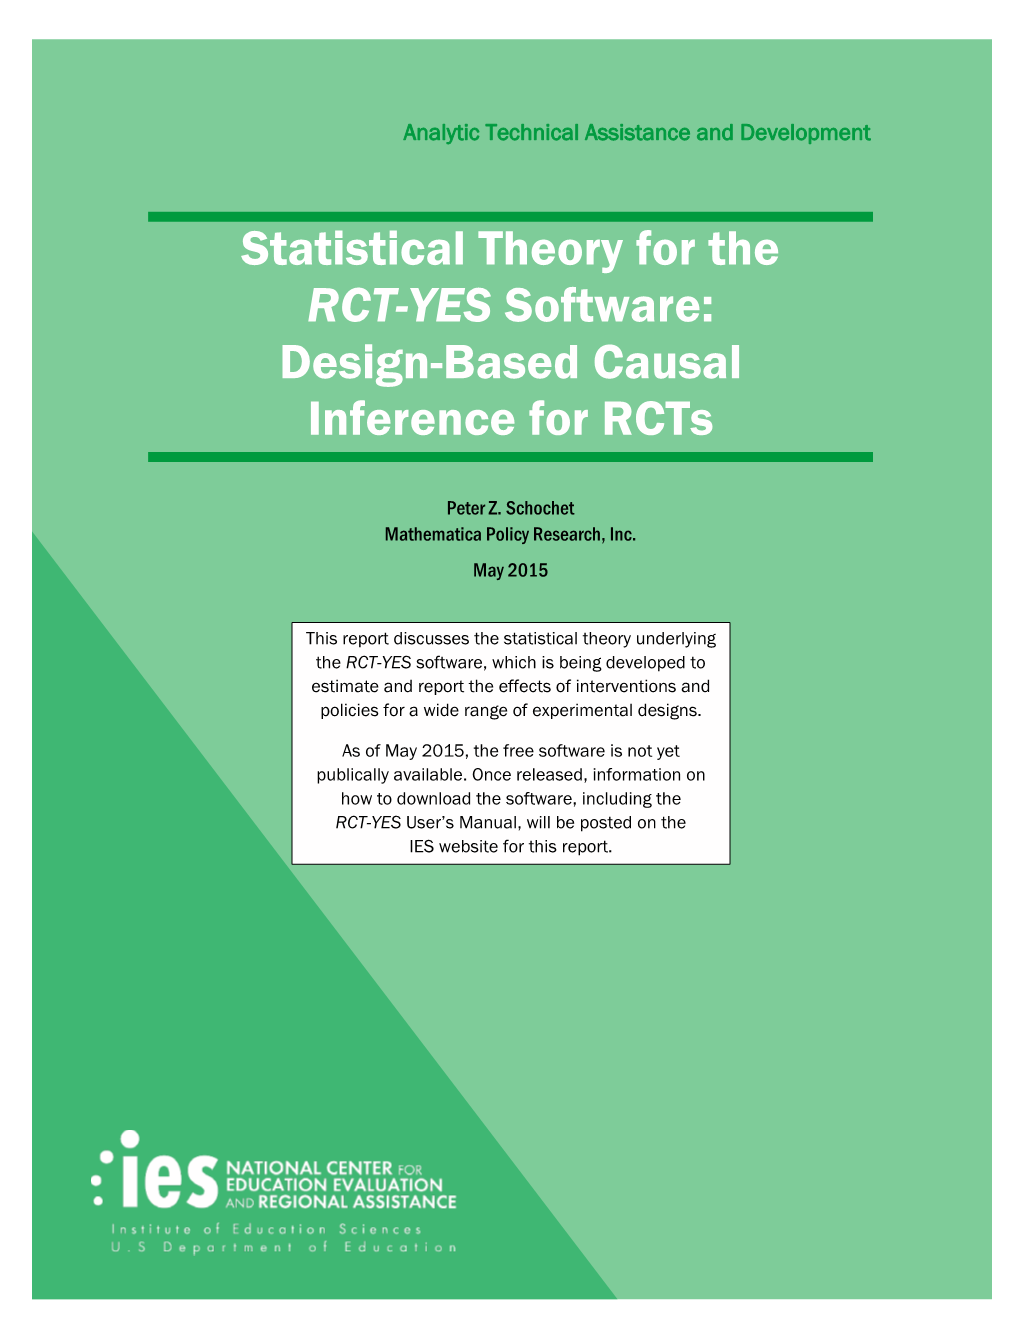 "RCT-YES" Software: Design-Based Causal Inference for Rcts